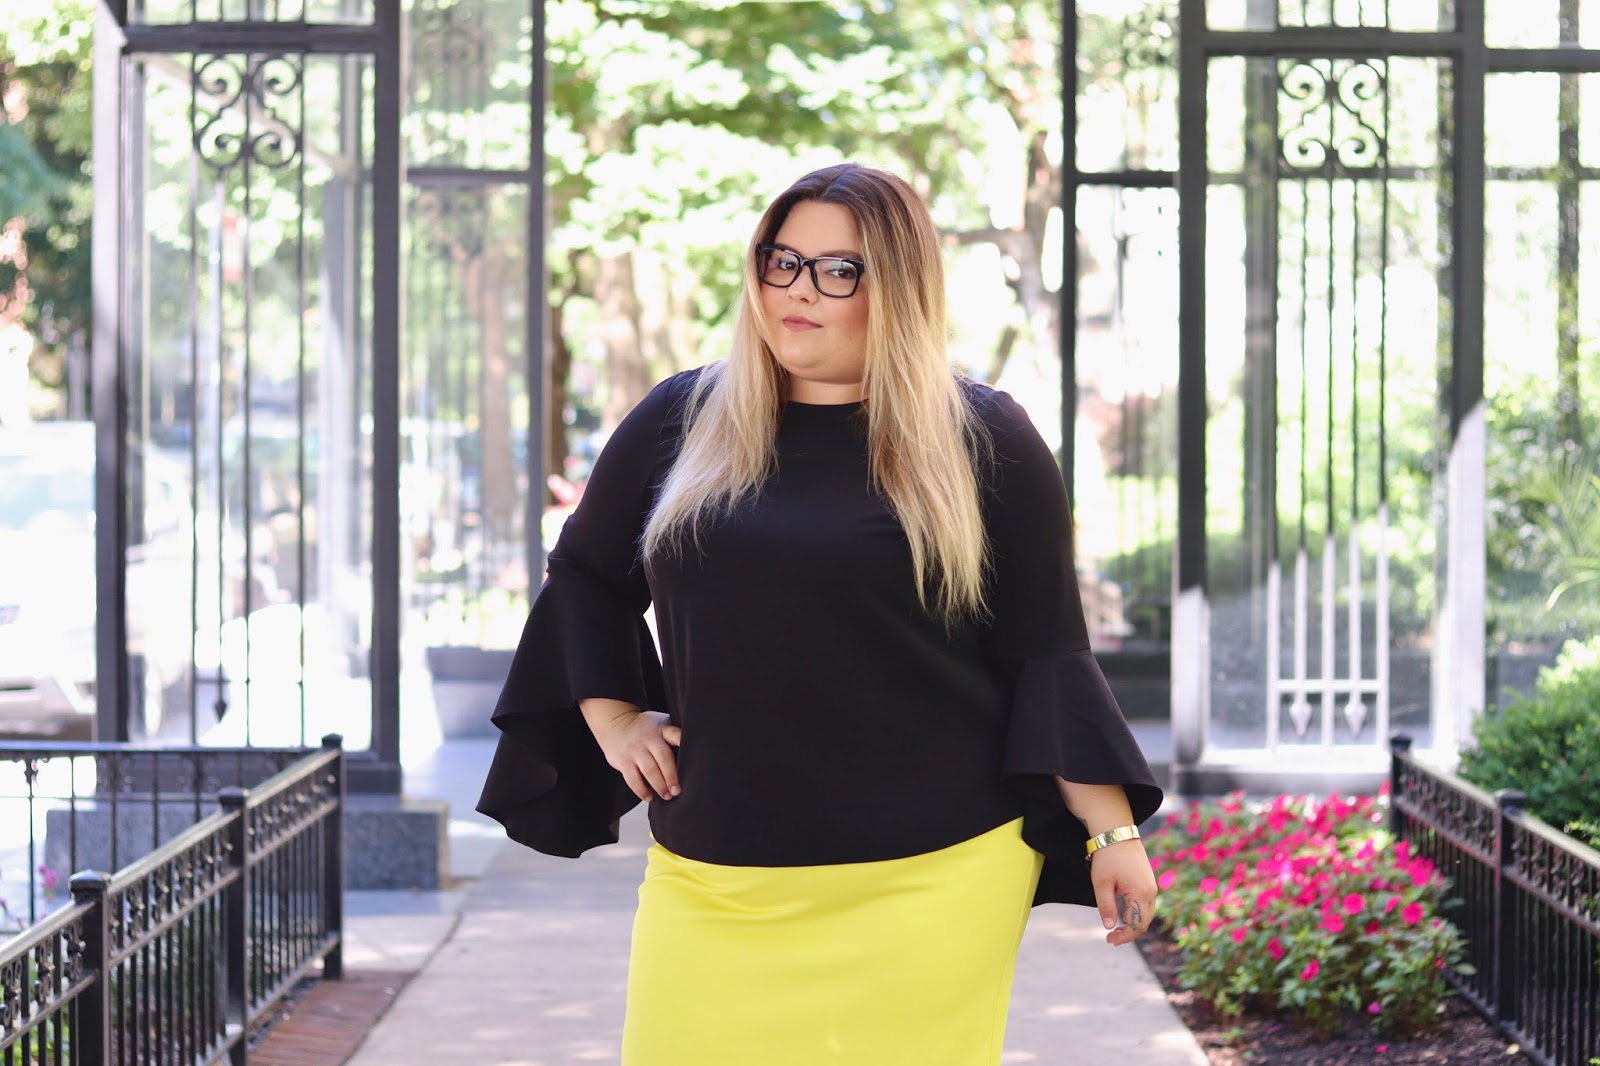 eloquii, chicago, Chicago fashion, natalie craig, natalie in the city, plus size office attire, plus size professional attire, plus size fashion blogger, affordable plus size fashion, eloquii Chicago, curves and confidence, midwest, plus size neoprene, blogger review